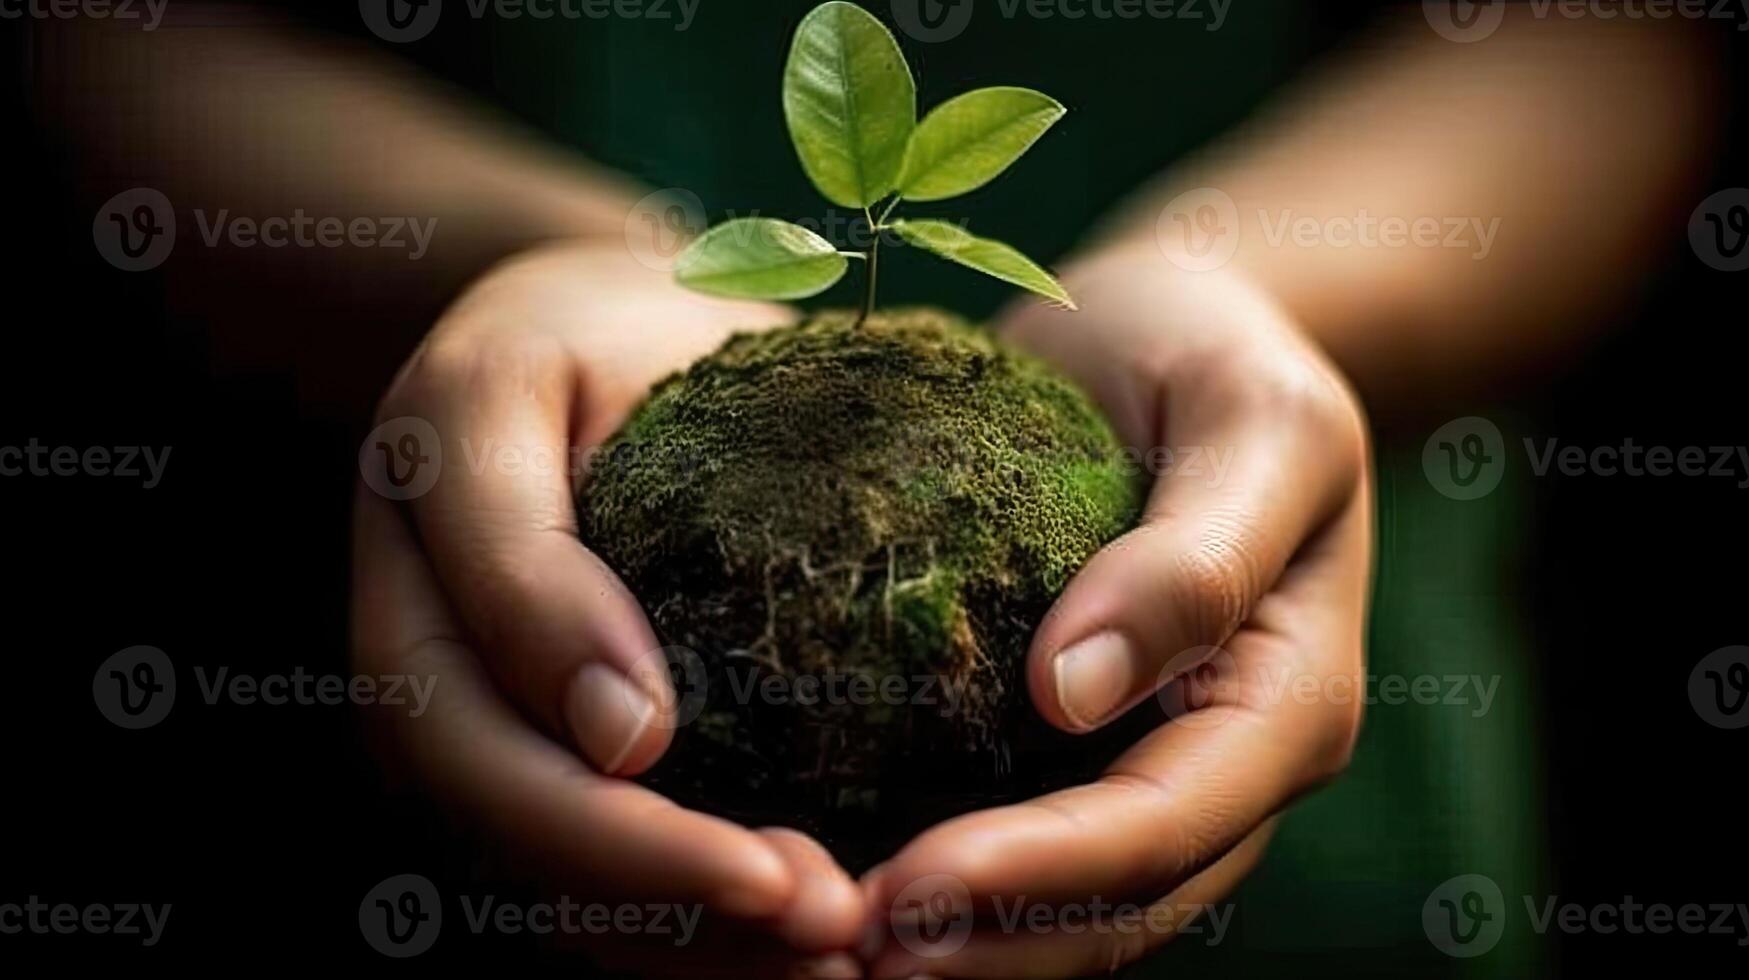 World Environment Day World Environment Day is an international event day designated on June 5th each year to raise awareness of environmental protection around the world, Illustration photo